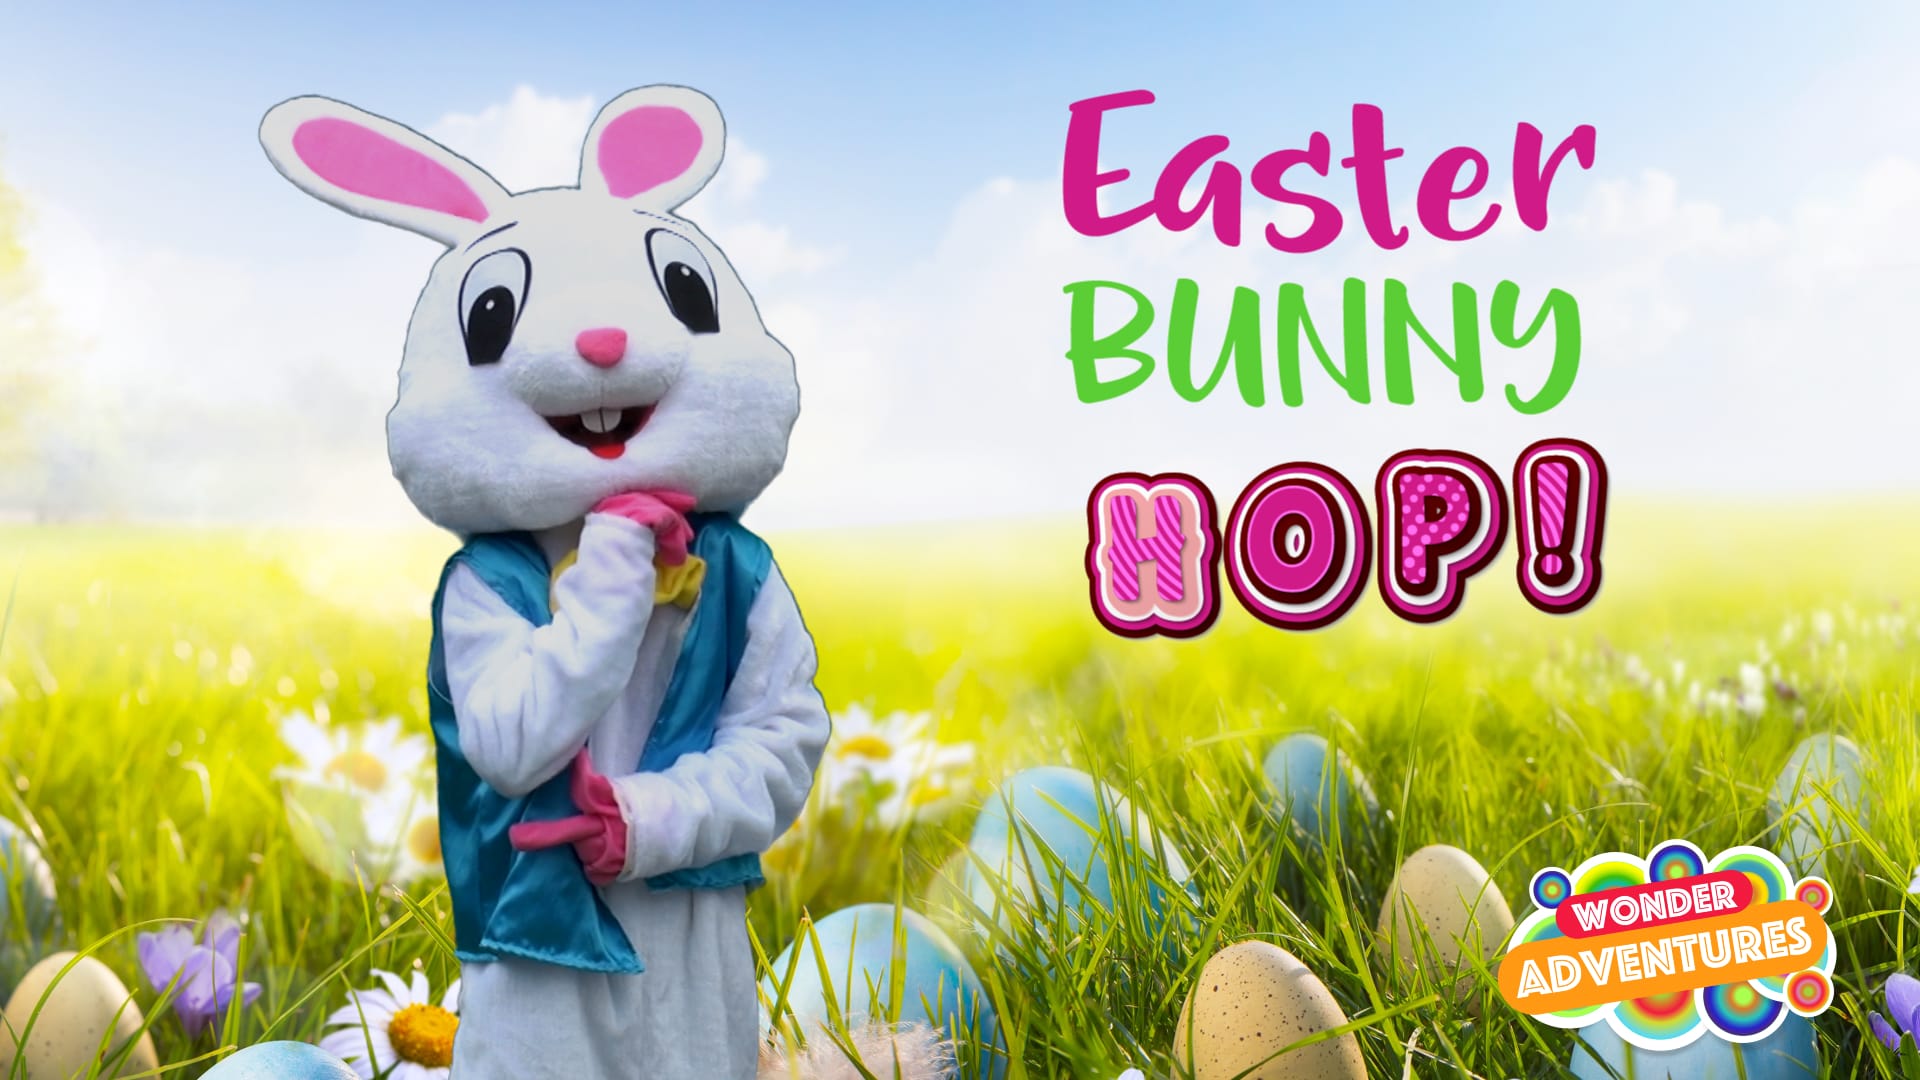 The Easter Bunny Hopamazing New Fun Kids Song For Easter